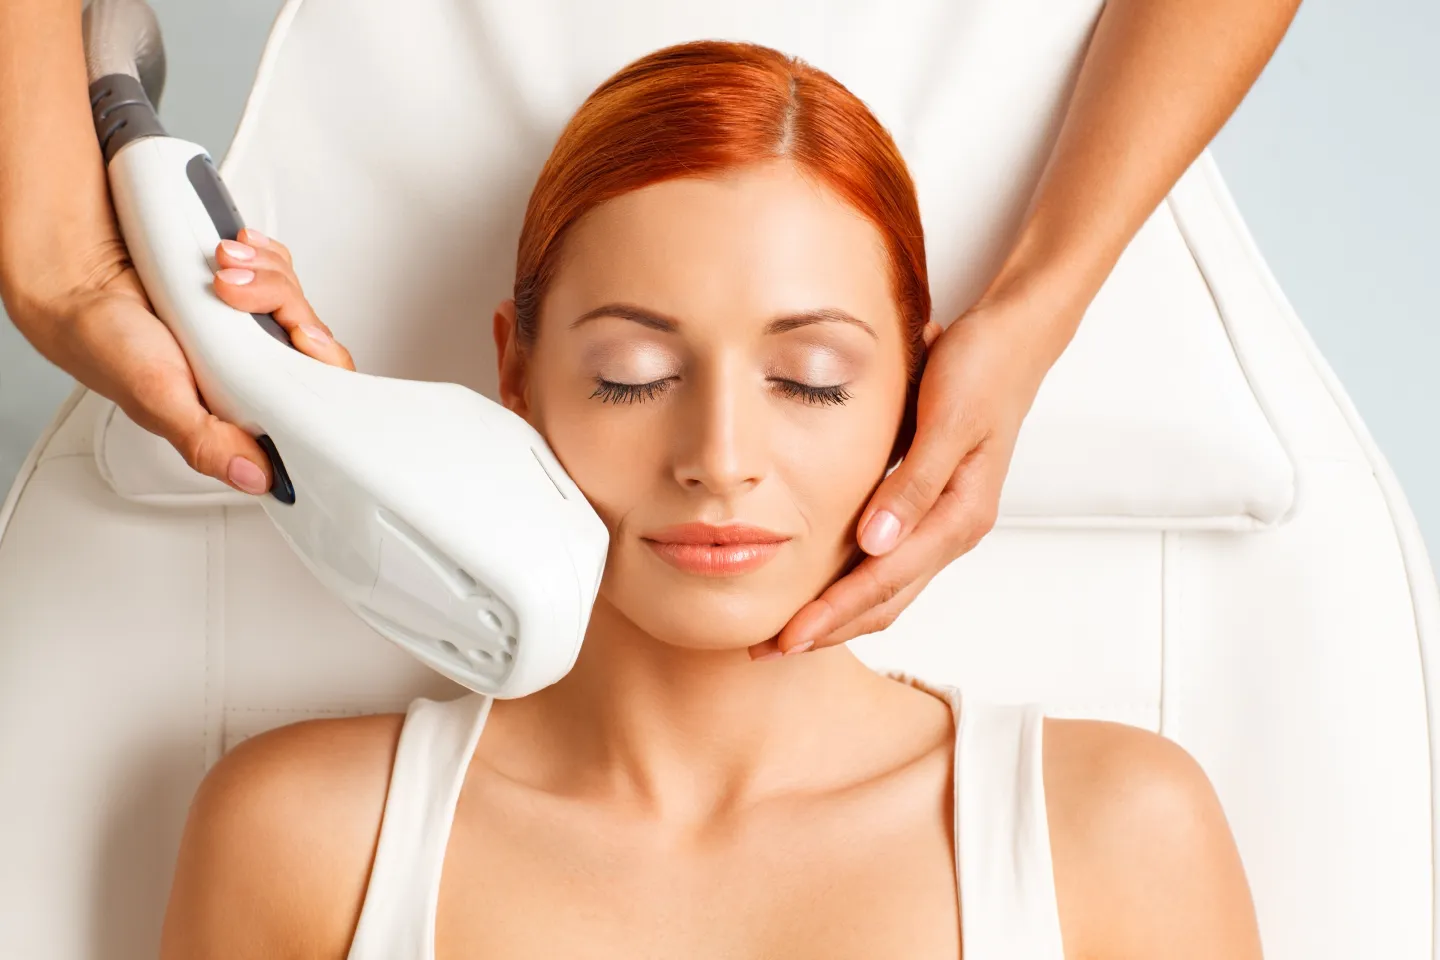 Rejuvenate Your Skin with Photofacial Therapy: Say Goodbye to Sun Damage